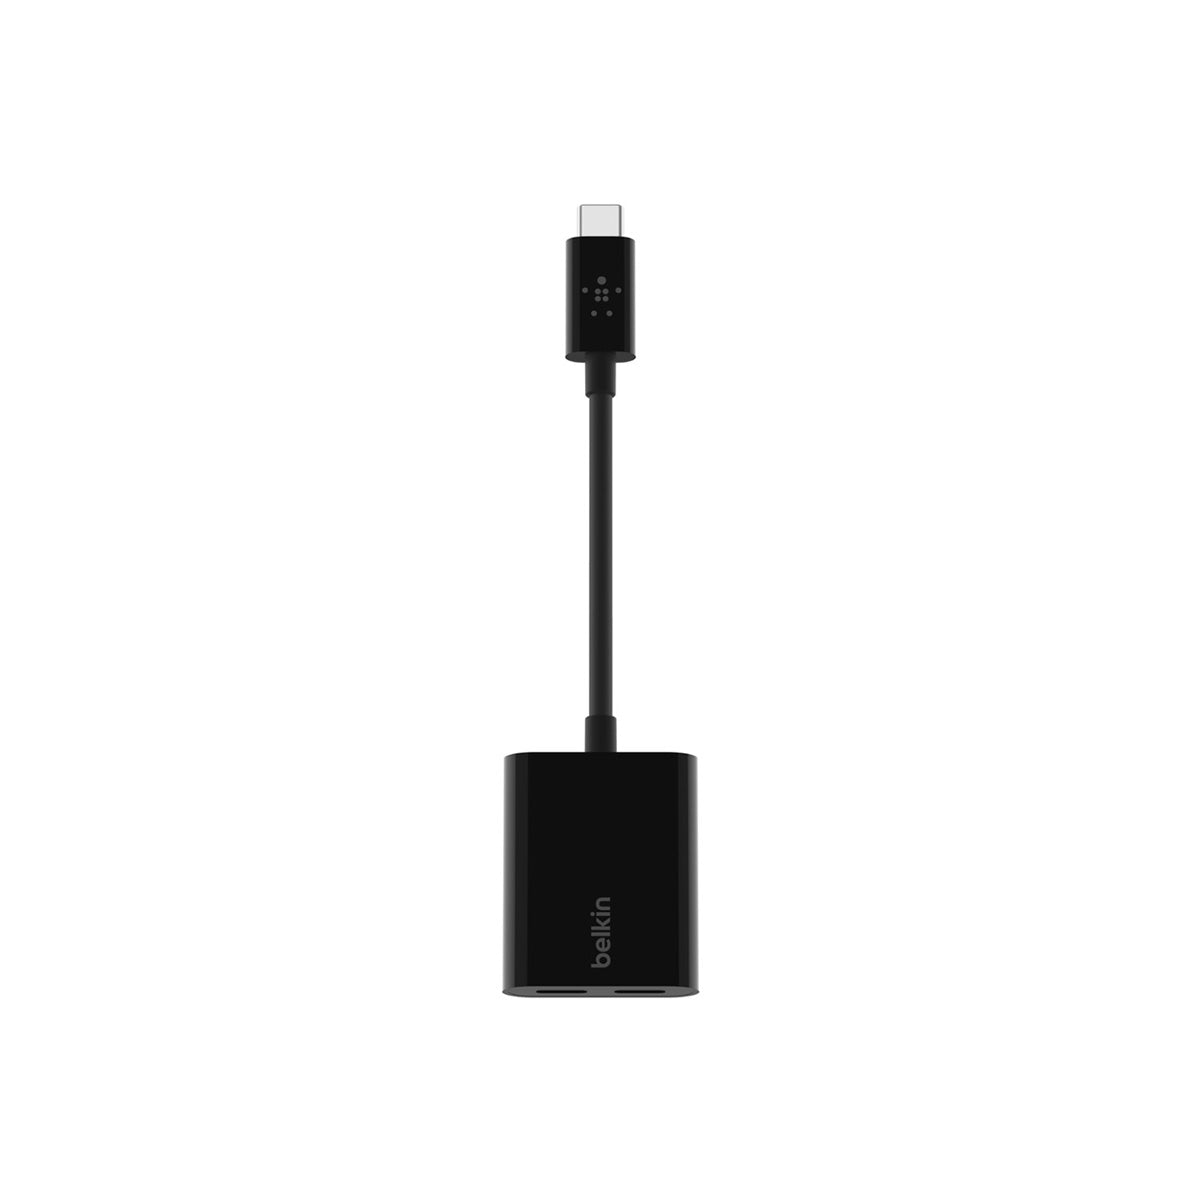 Belkin USB-C Charge Adapter (C-Audio + C-Charge)